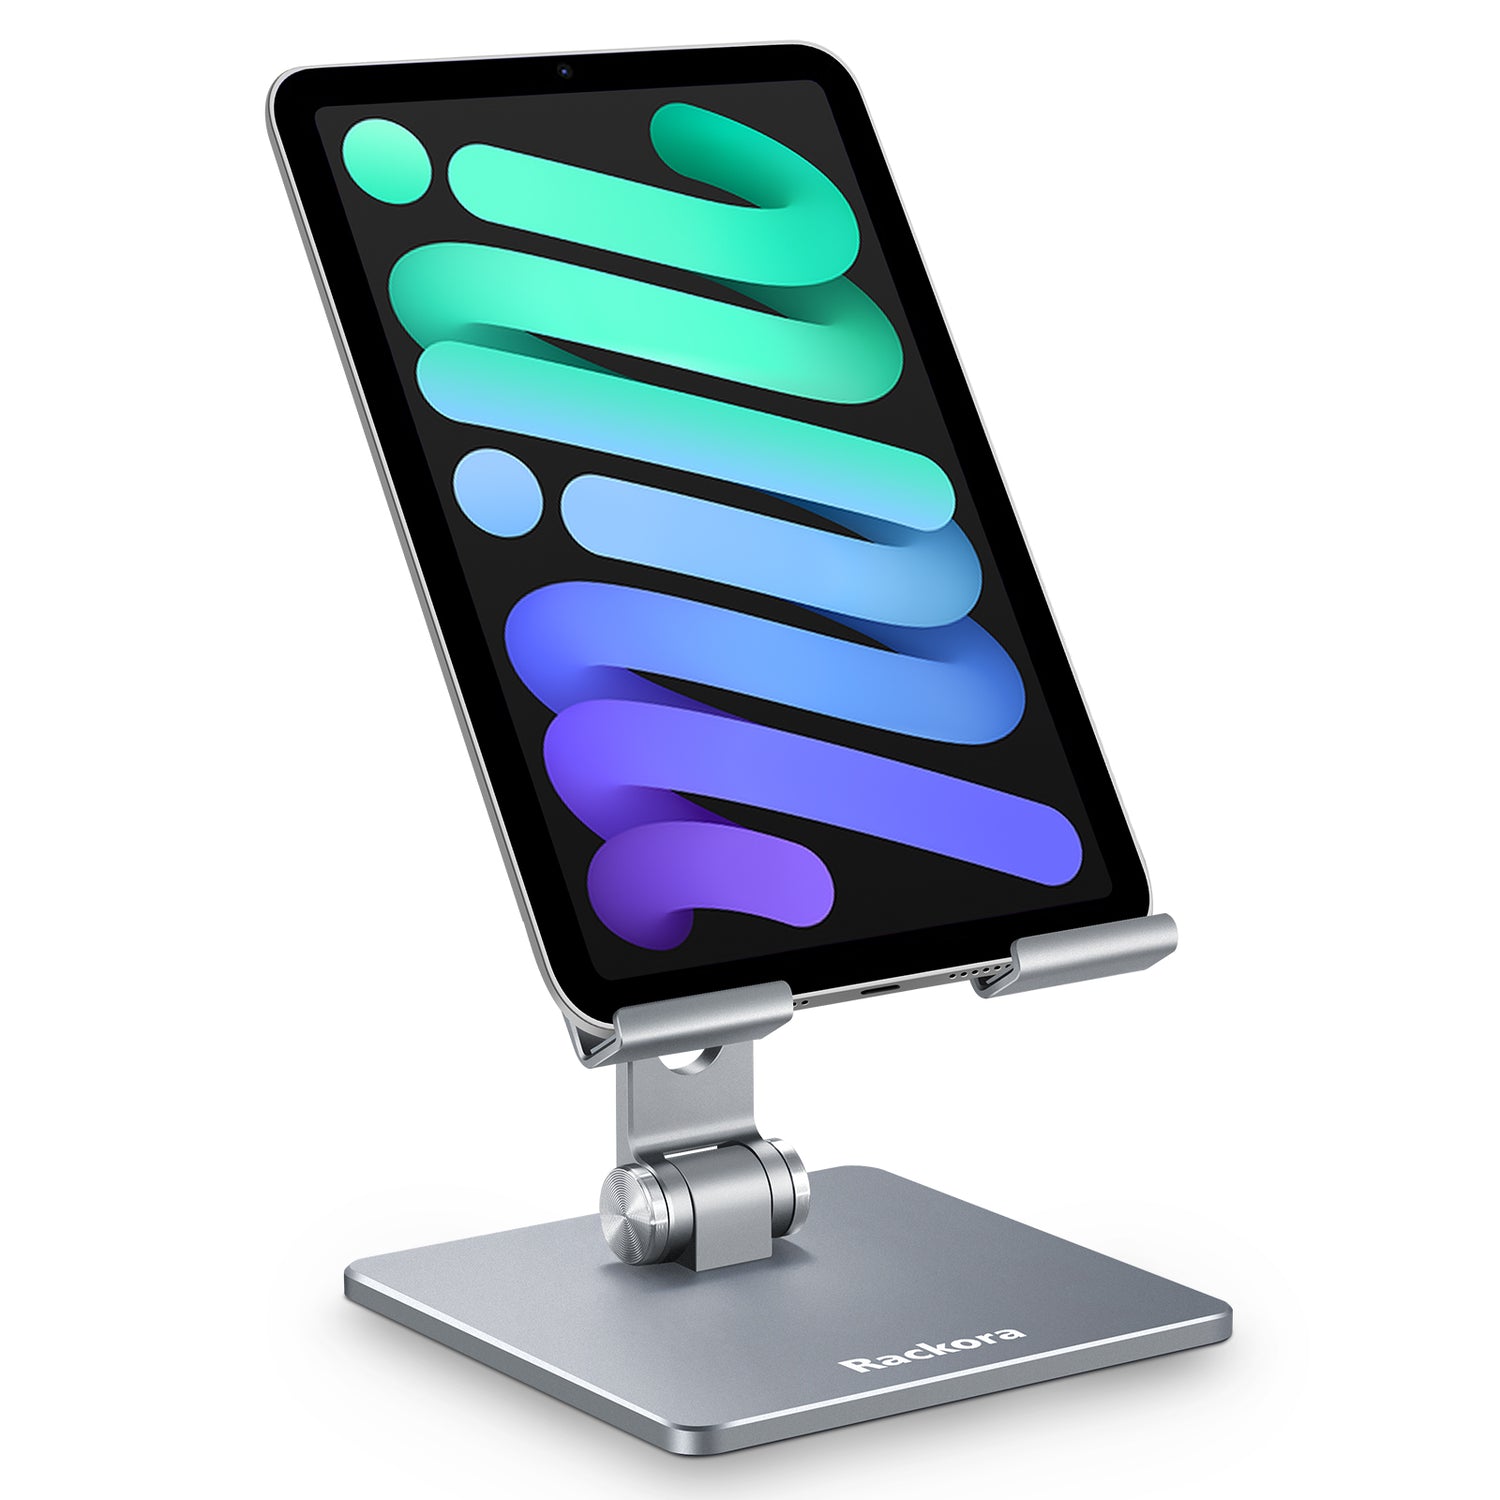 Why you should buy Portable Stand?